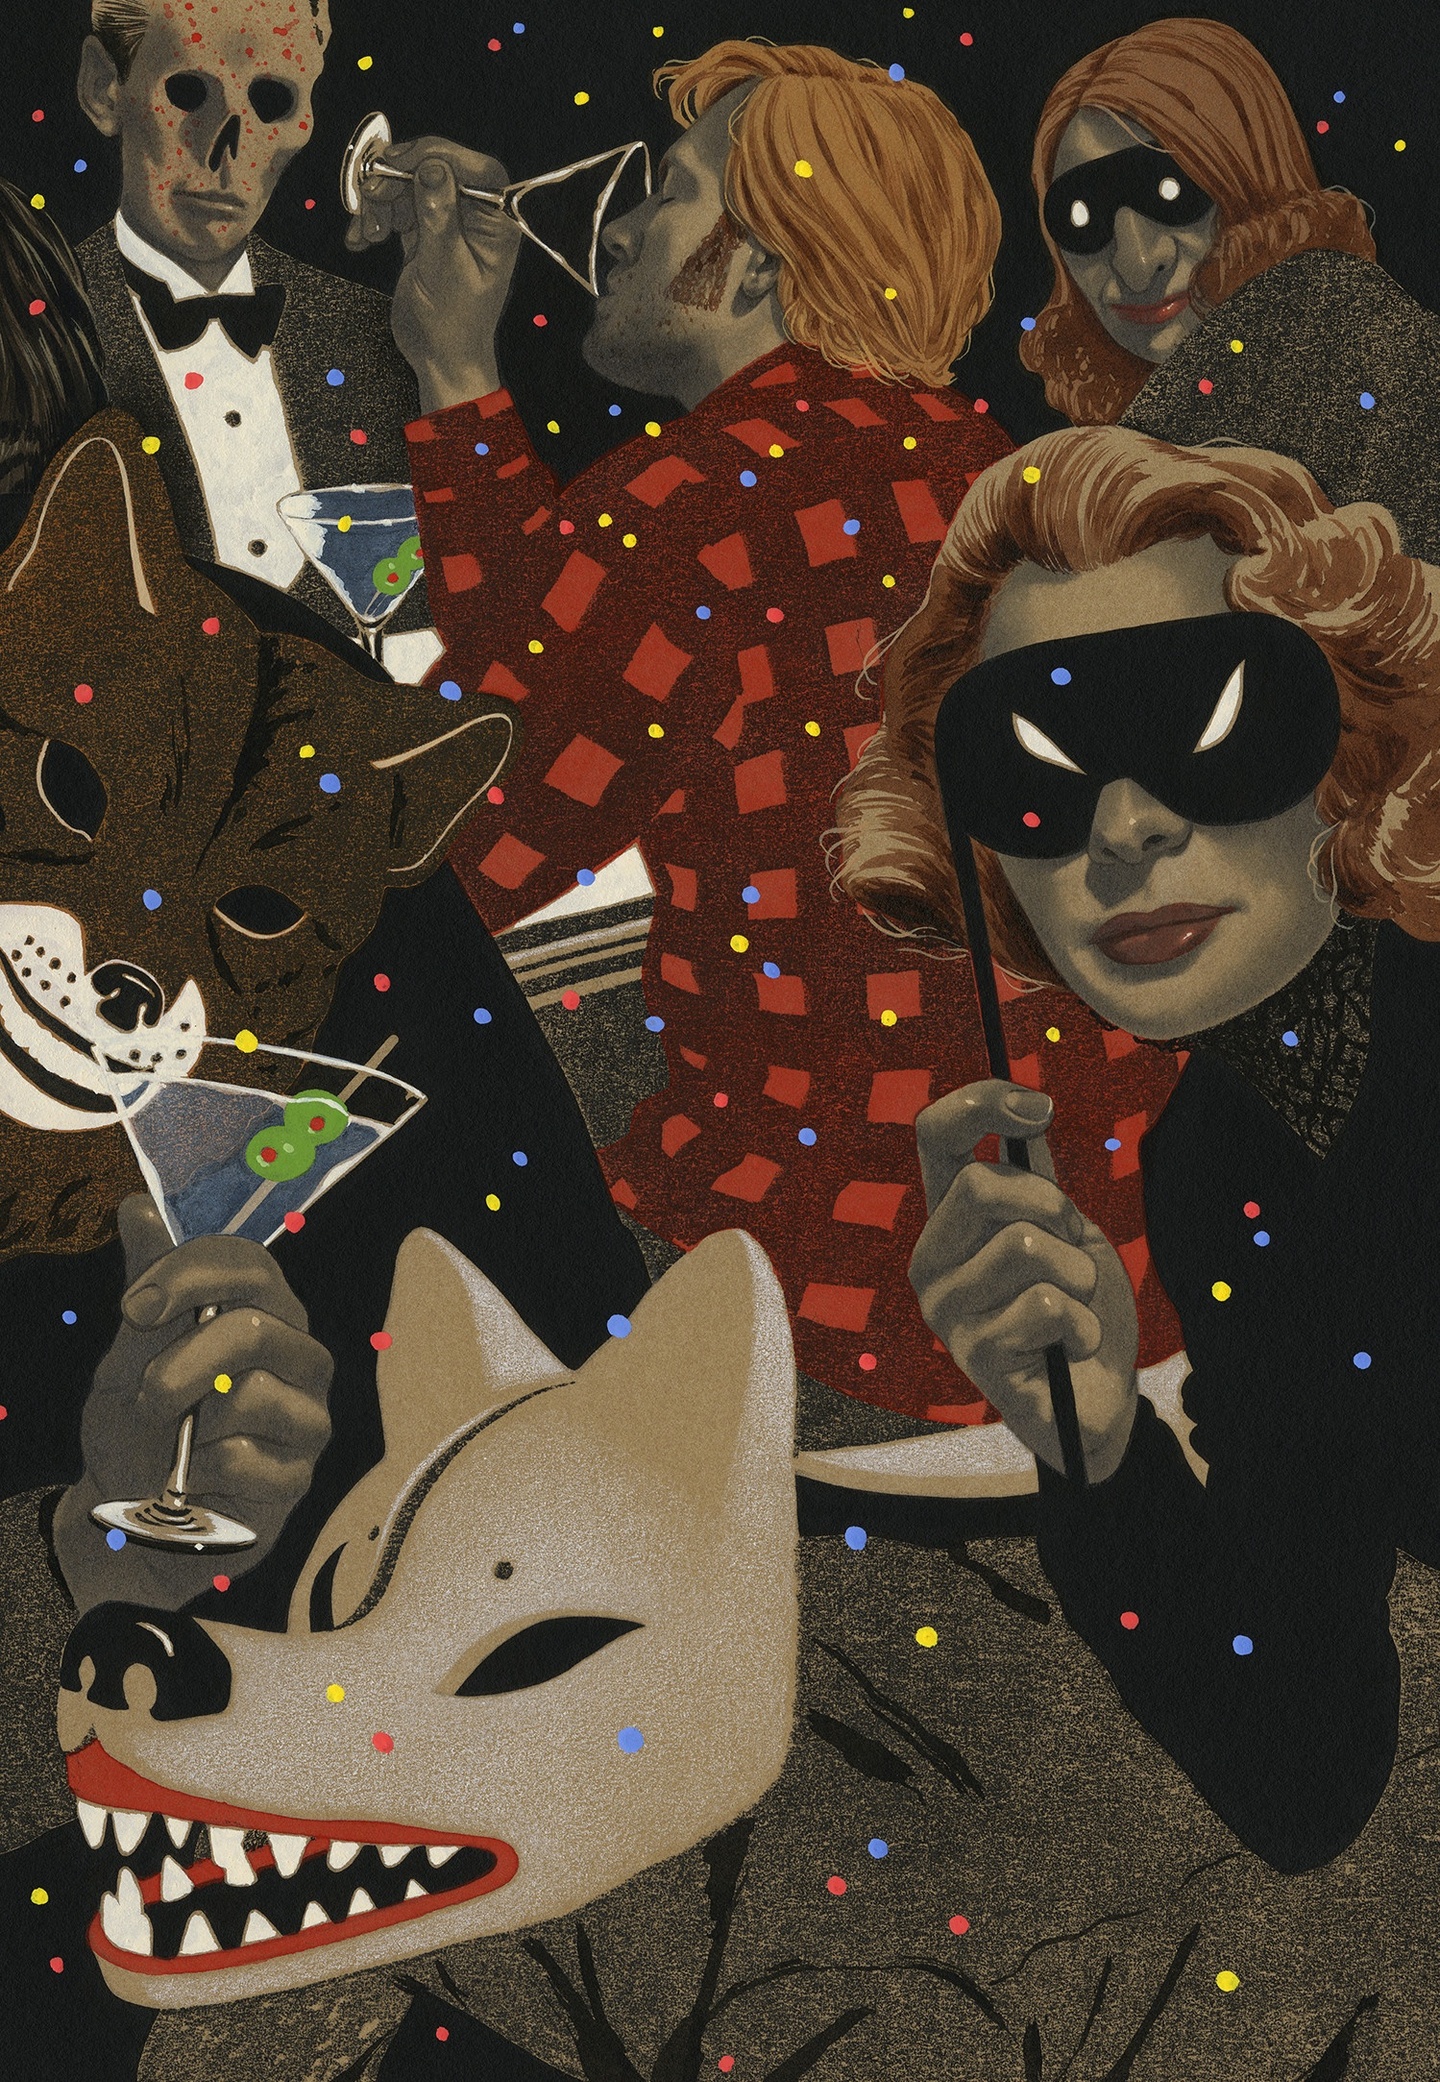 Six people at a party: some wear masquerade masks, others wolf masks; the face of another in the background half skull. The scene is resplendent with glitter and cocktails.